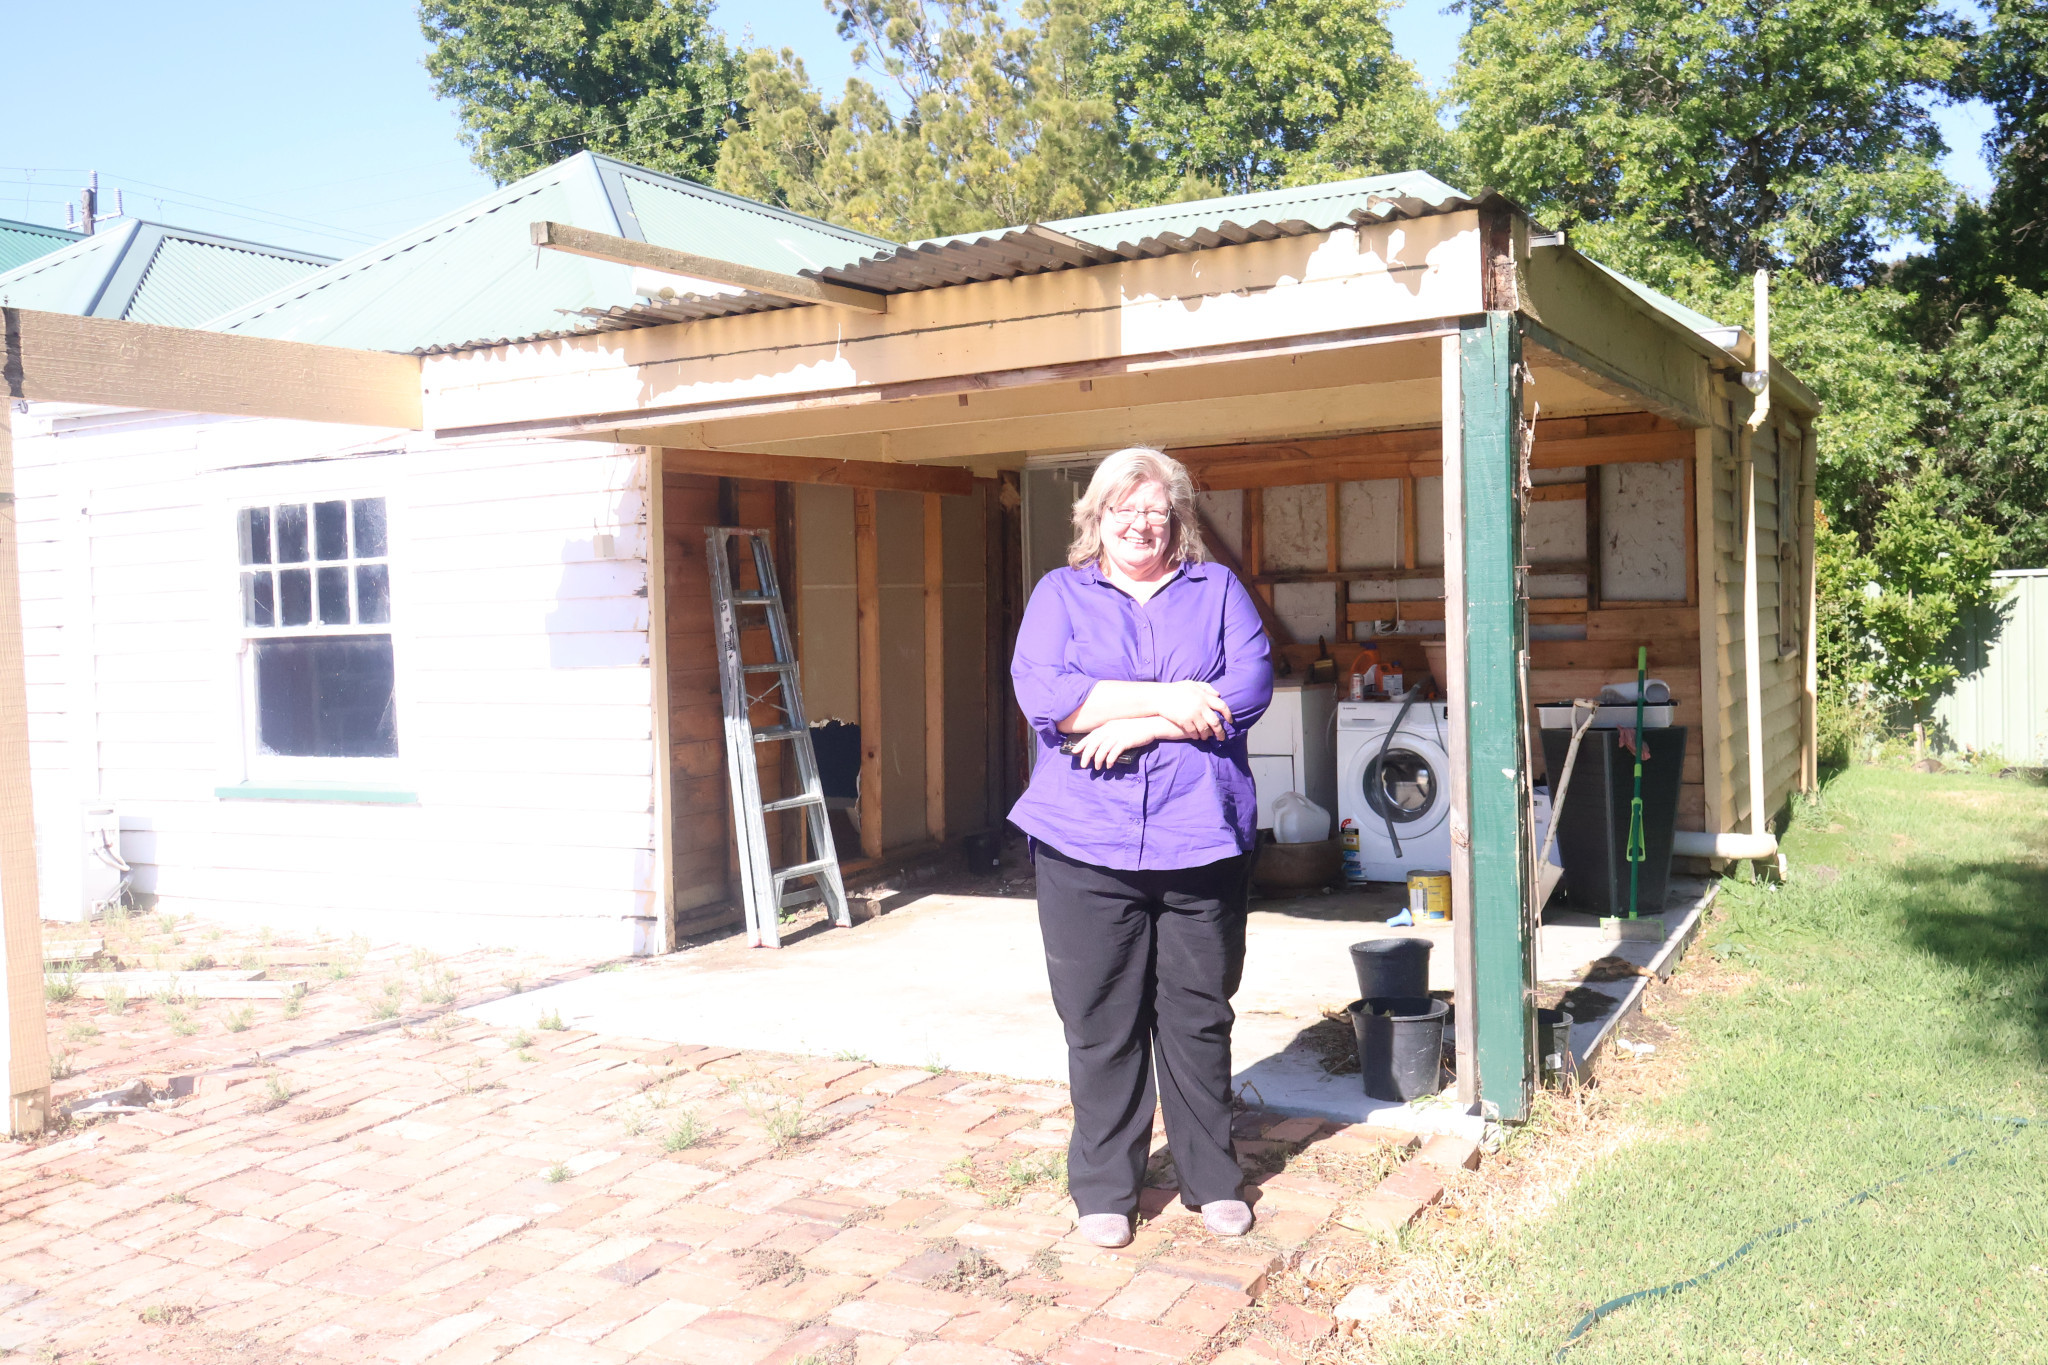 A long battle: Over a year on from the October 2022 floods in Skipton, Maree White continues to pick up the pieces after a long battle with insurance companies.